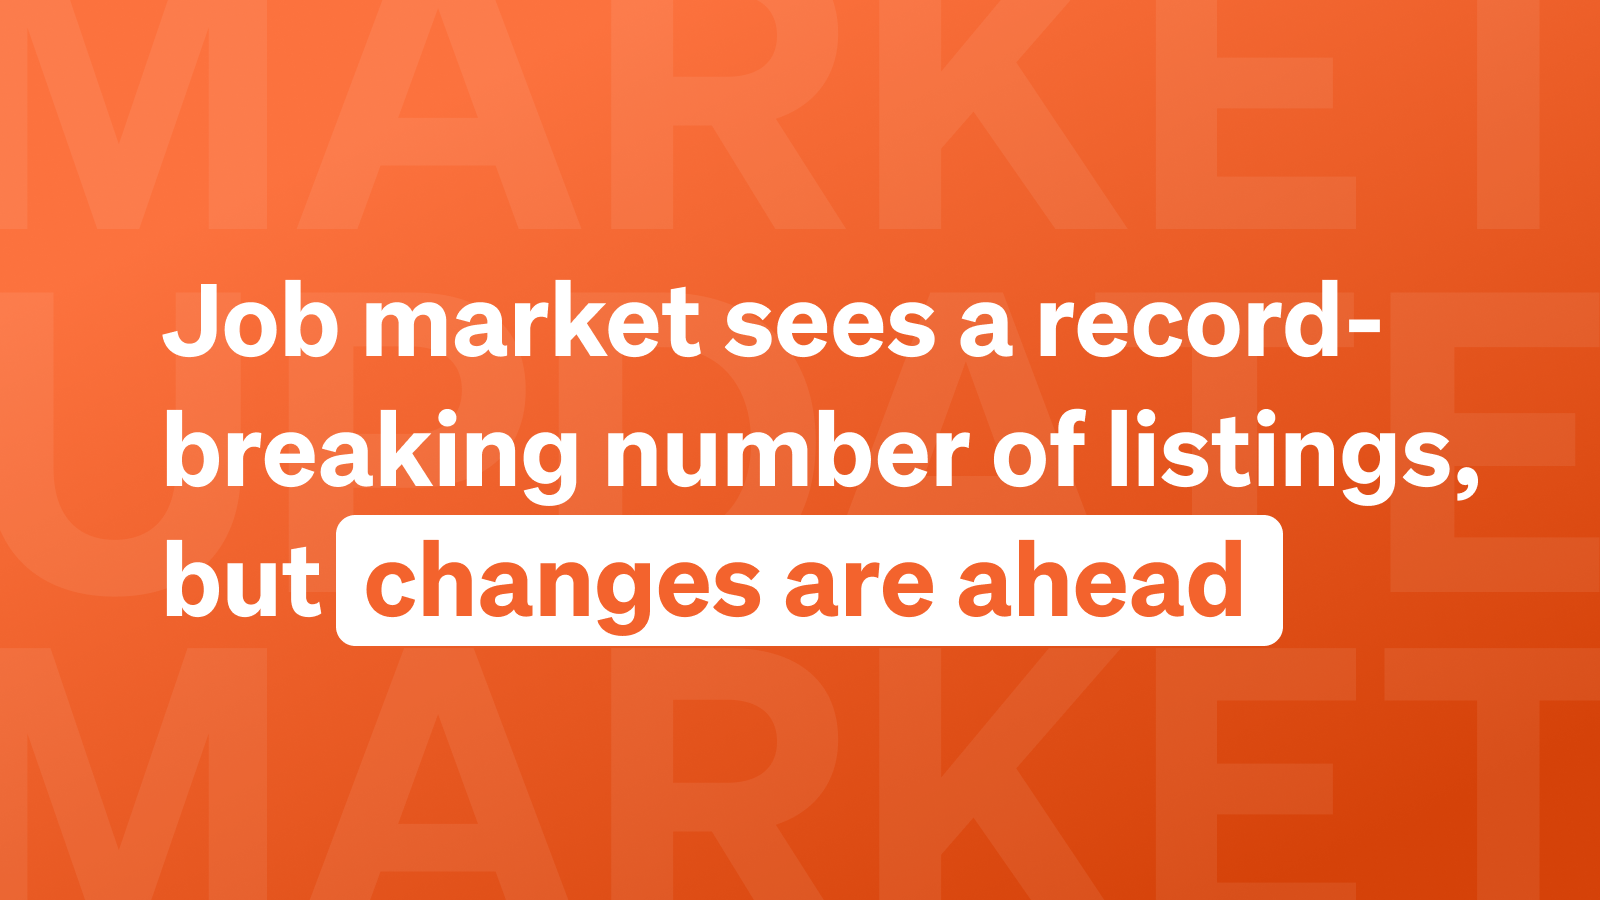 Job market sees a record-breaking number of listings, but changes are ahead